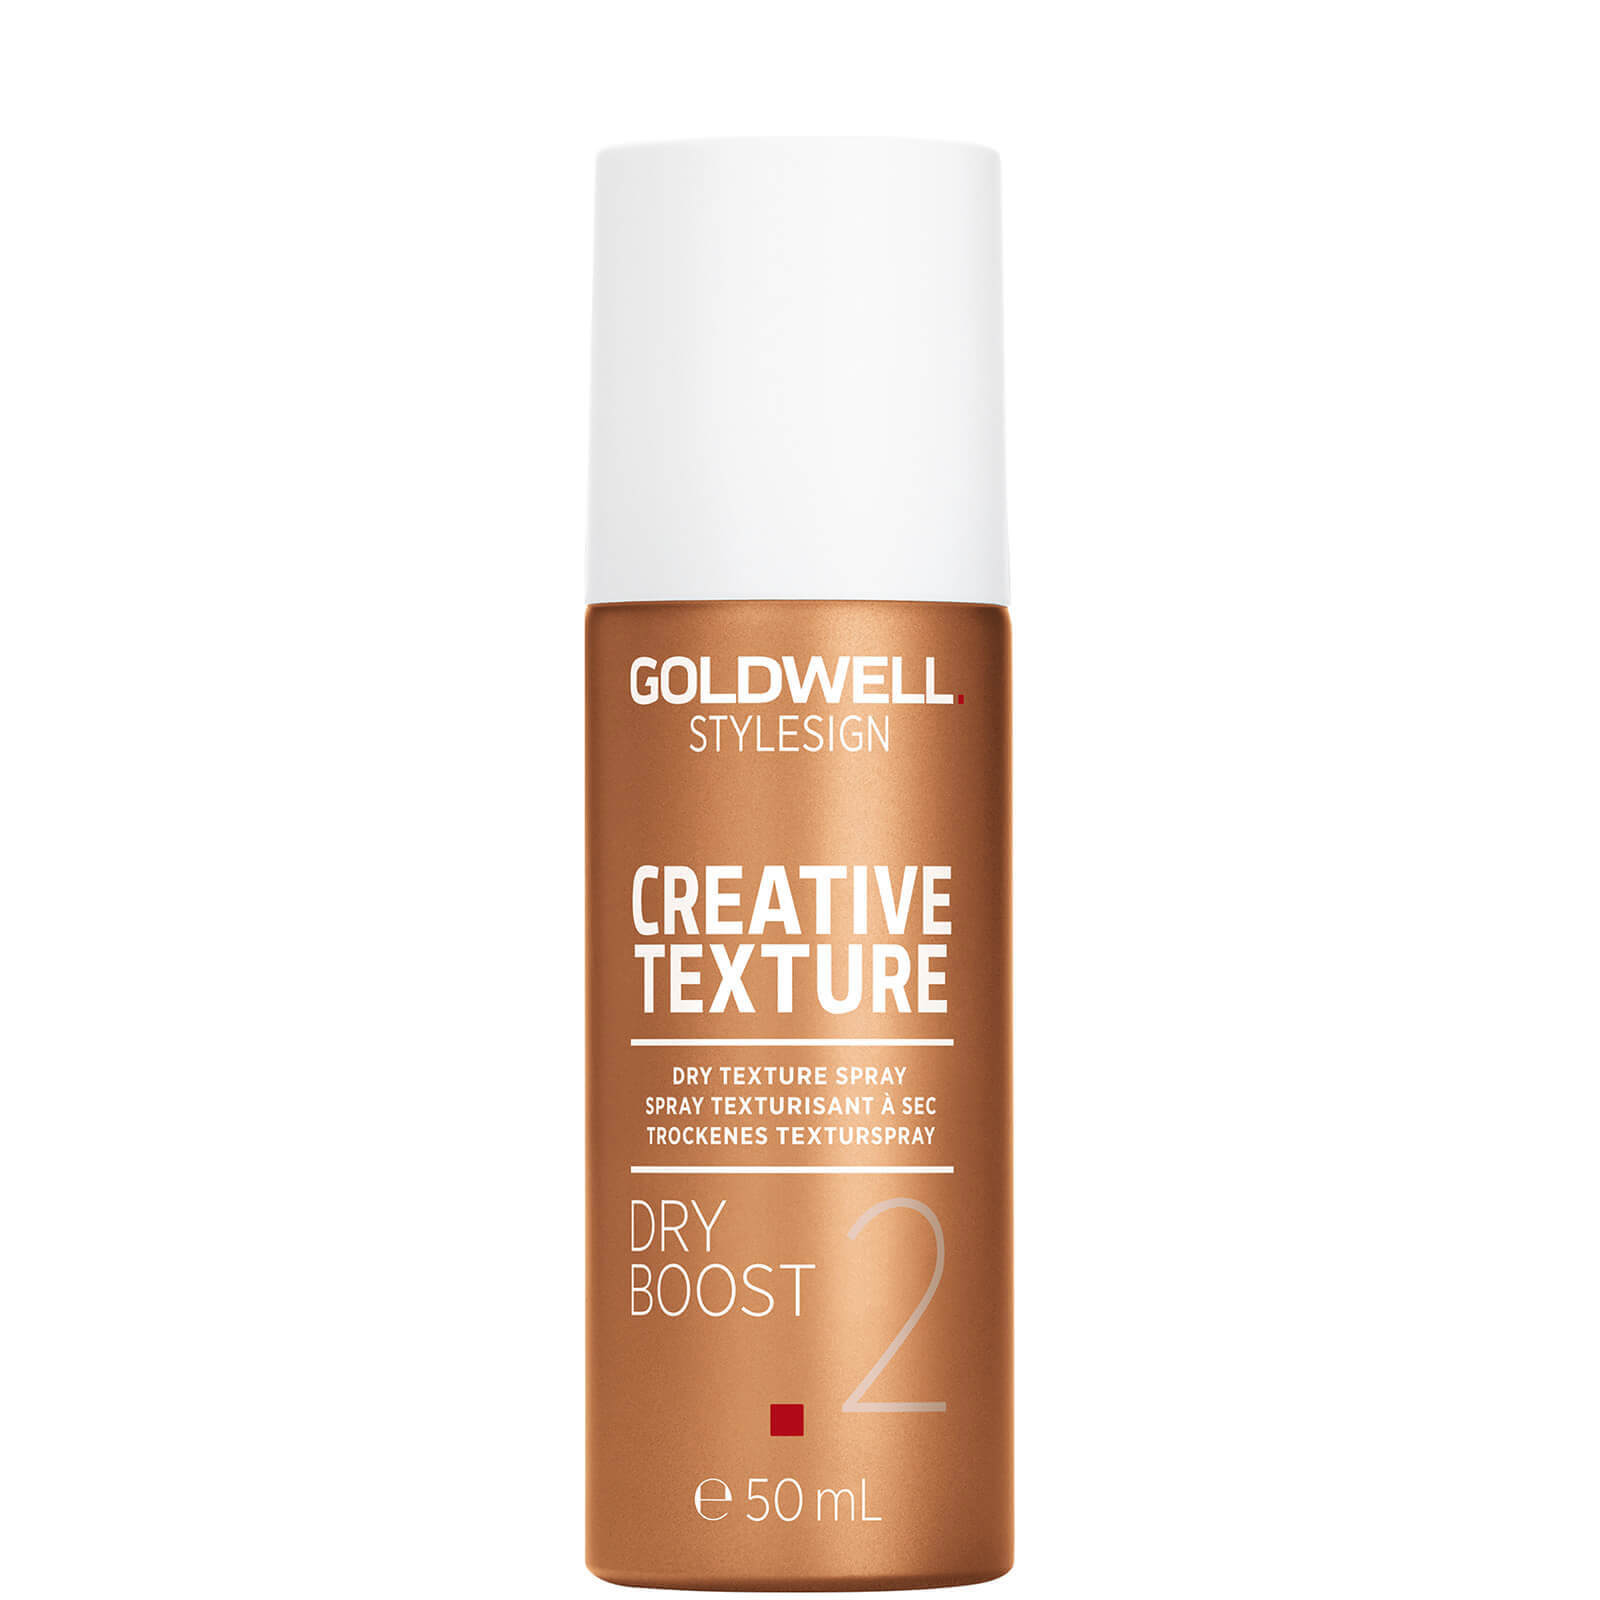 Image of Goldwell StyleSign Creative Texture Dry Boost Texture Spray 200ml